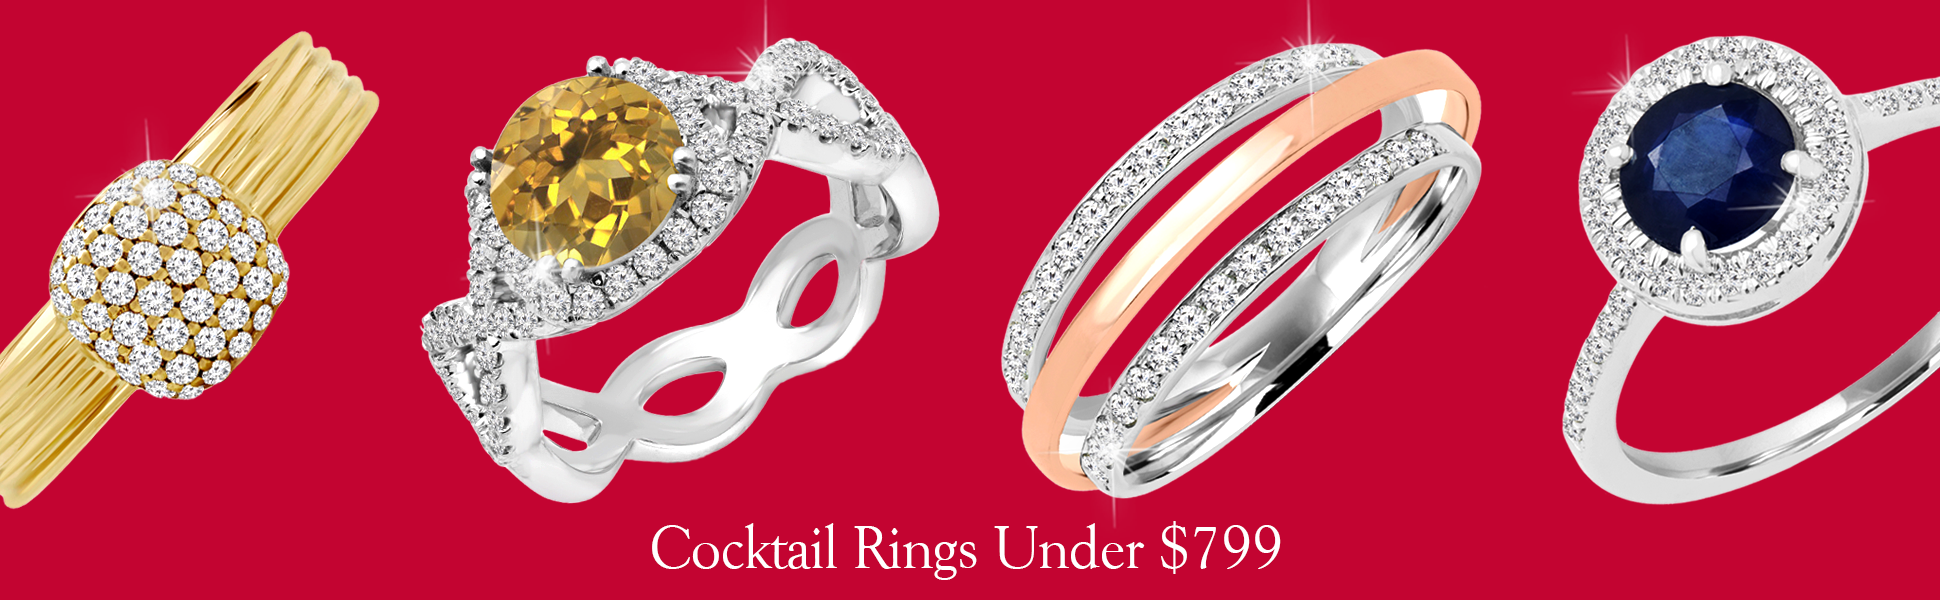 cocktail rings under 799$